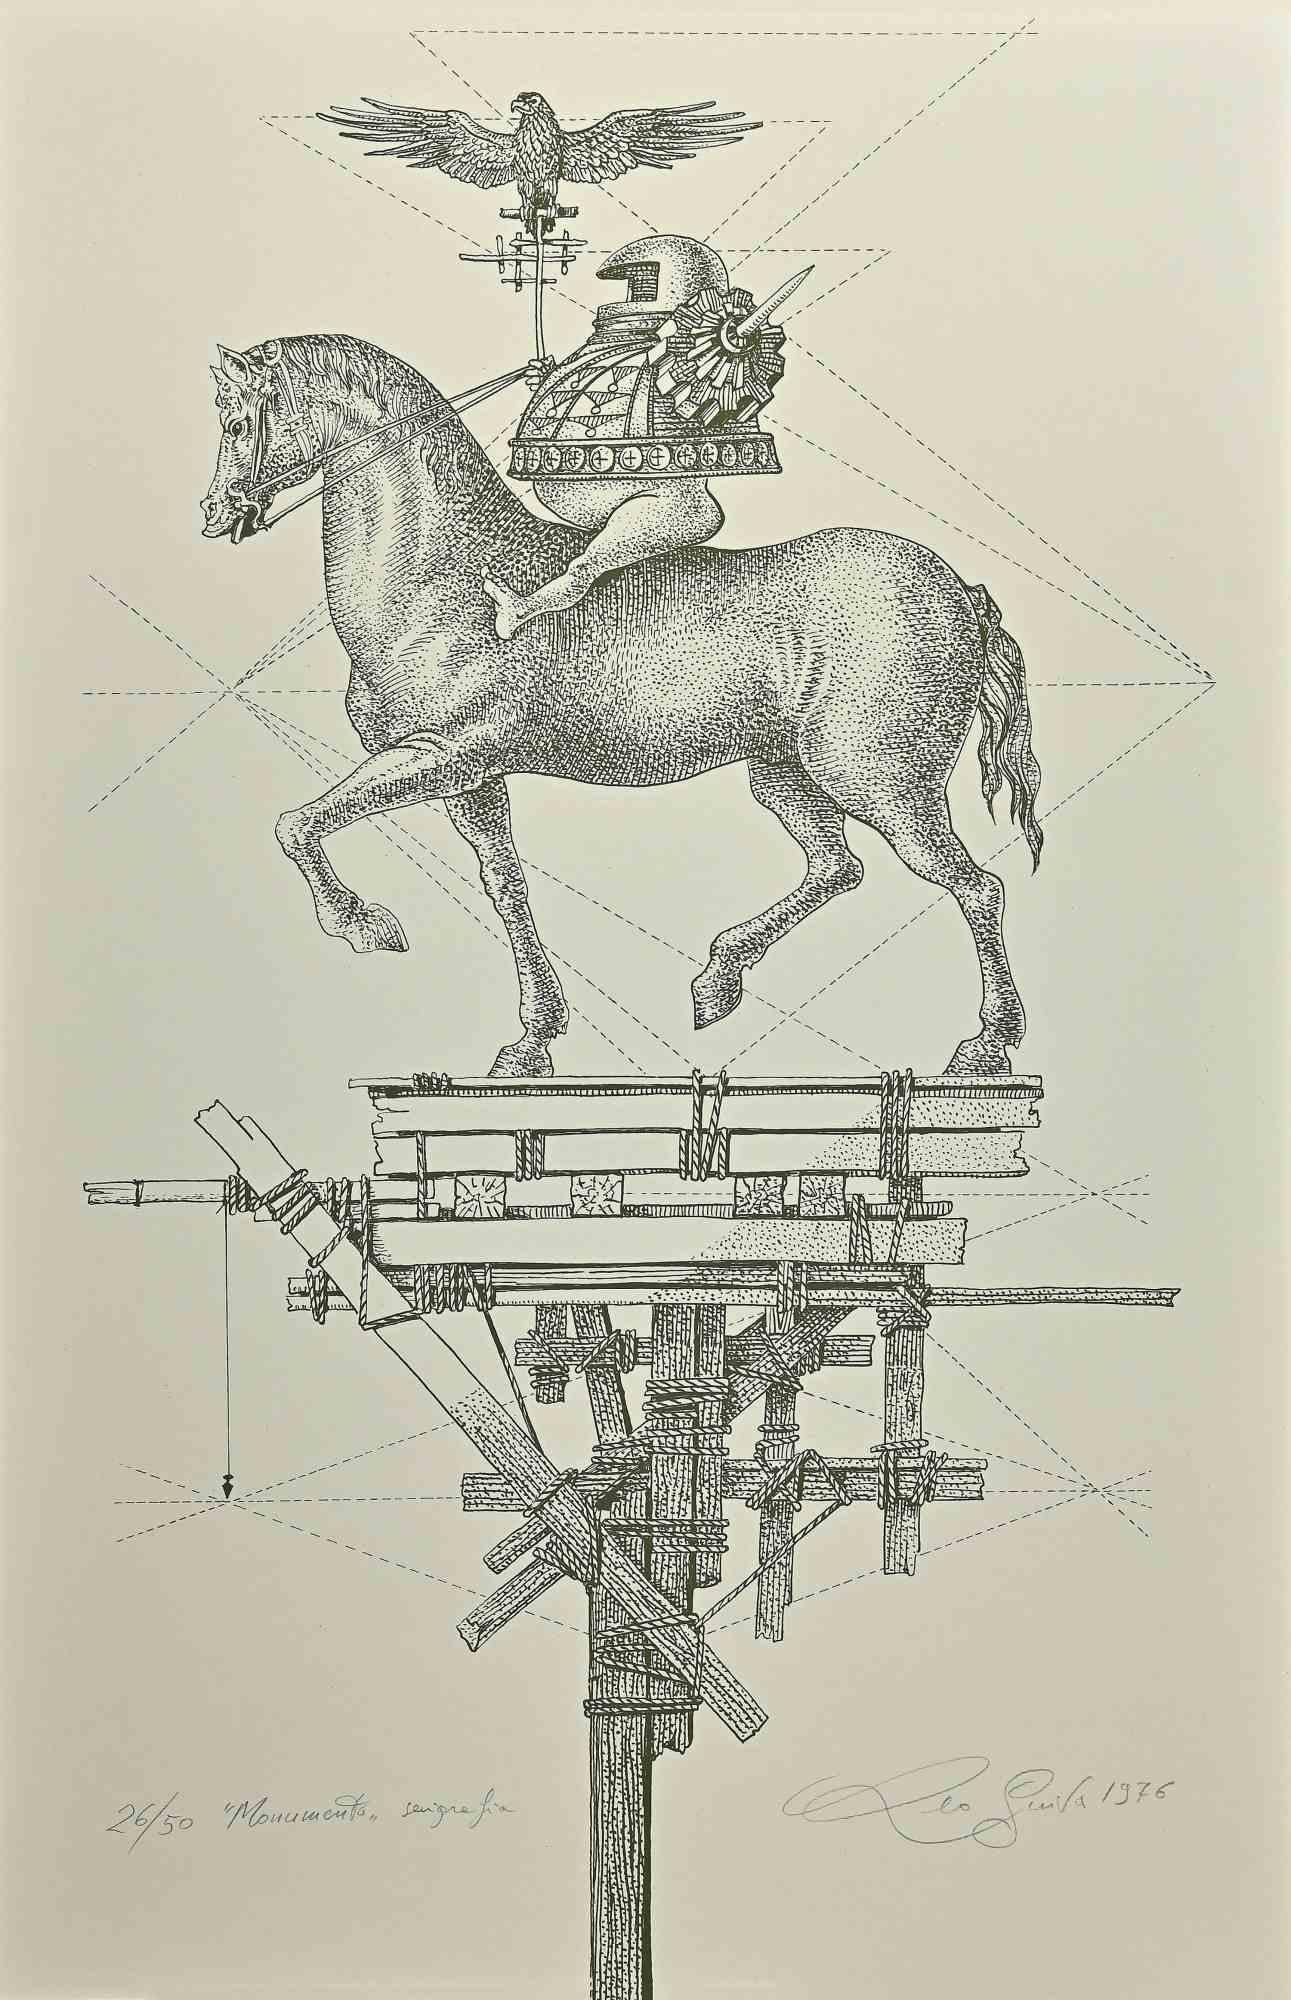 Horse is an etching artwork on paper realized in 1976 by Leo Guida.

The artwork represents a horse and his satirical rider with an eagle opened-winged in his hand. The artwork is depicted skillfully through confident strokes and characterized by a